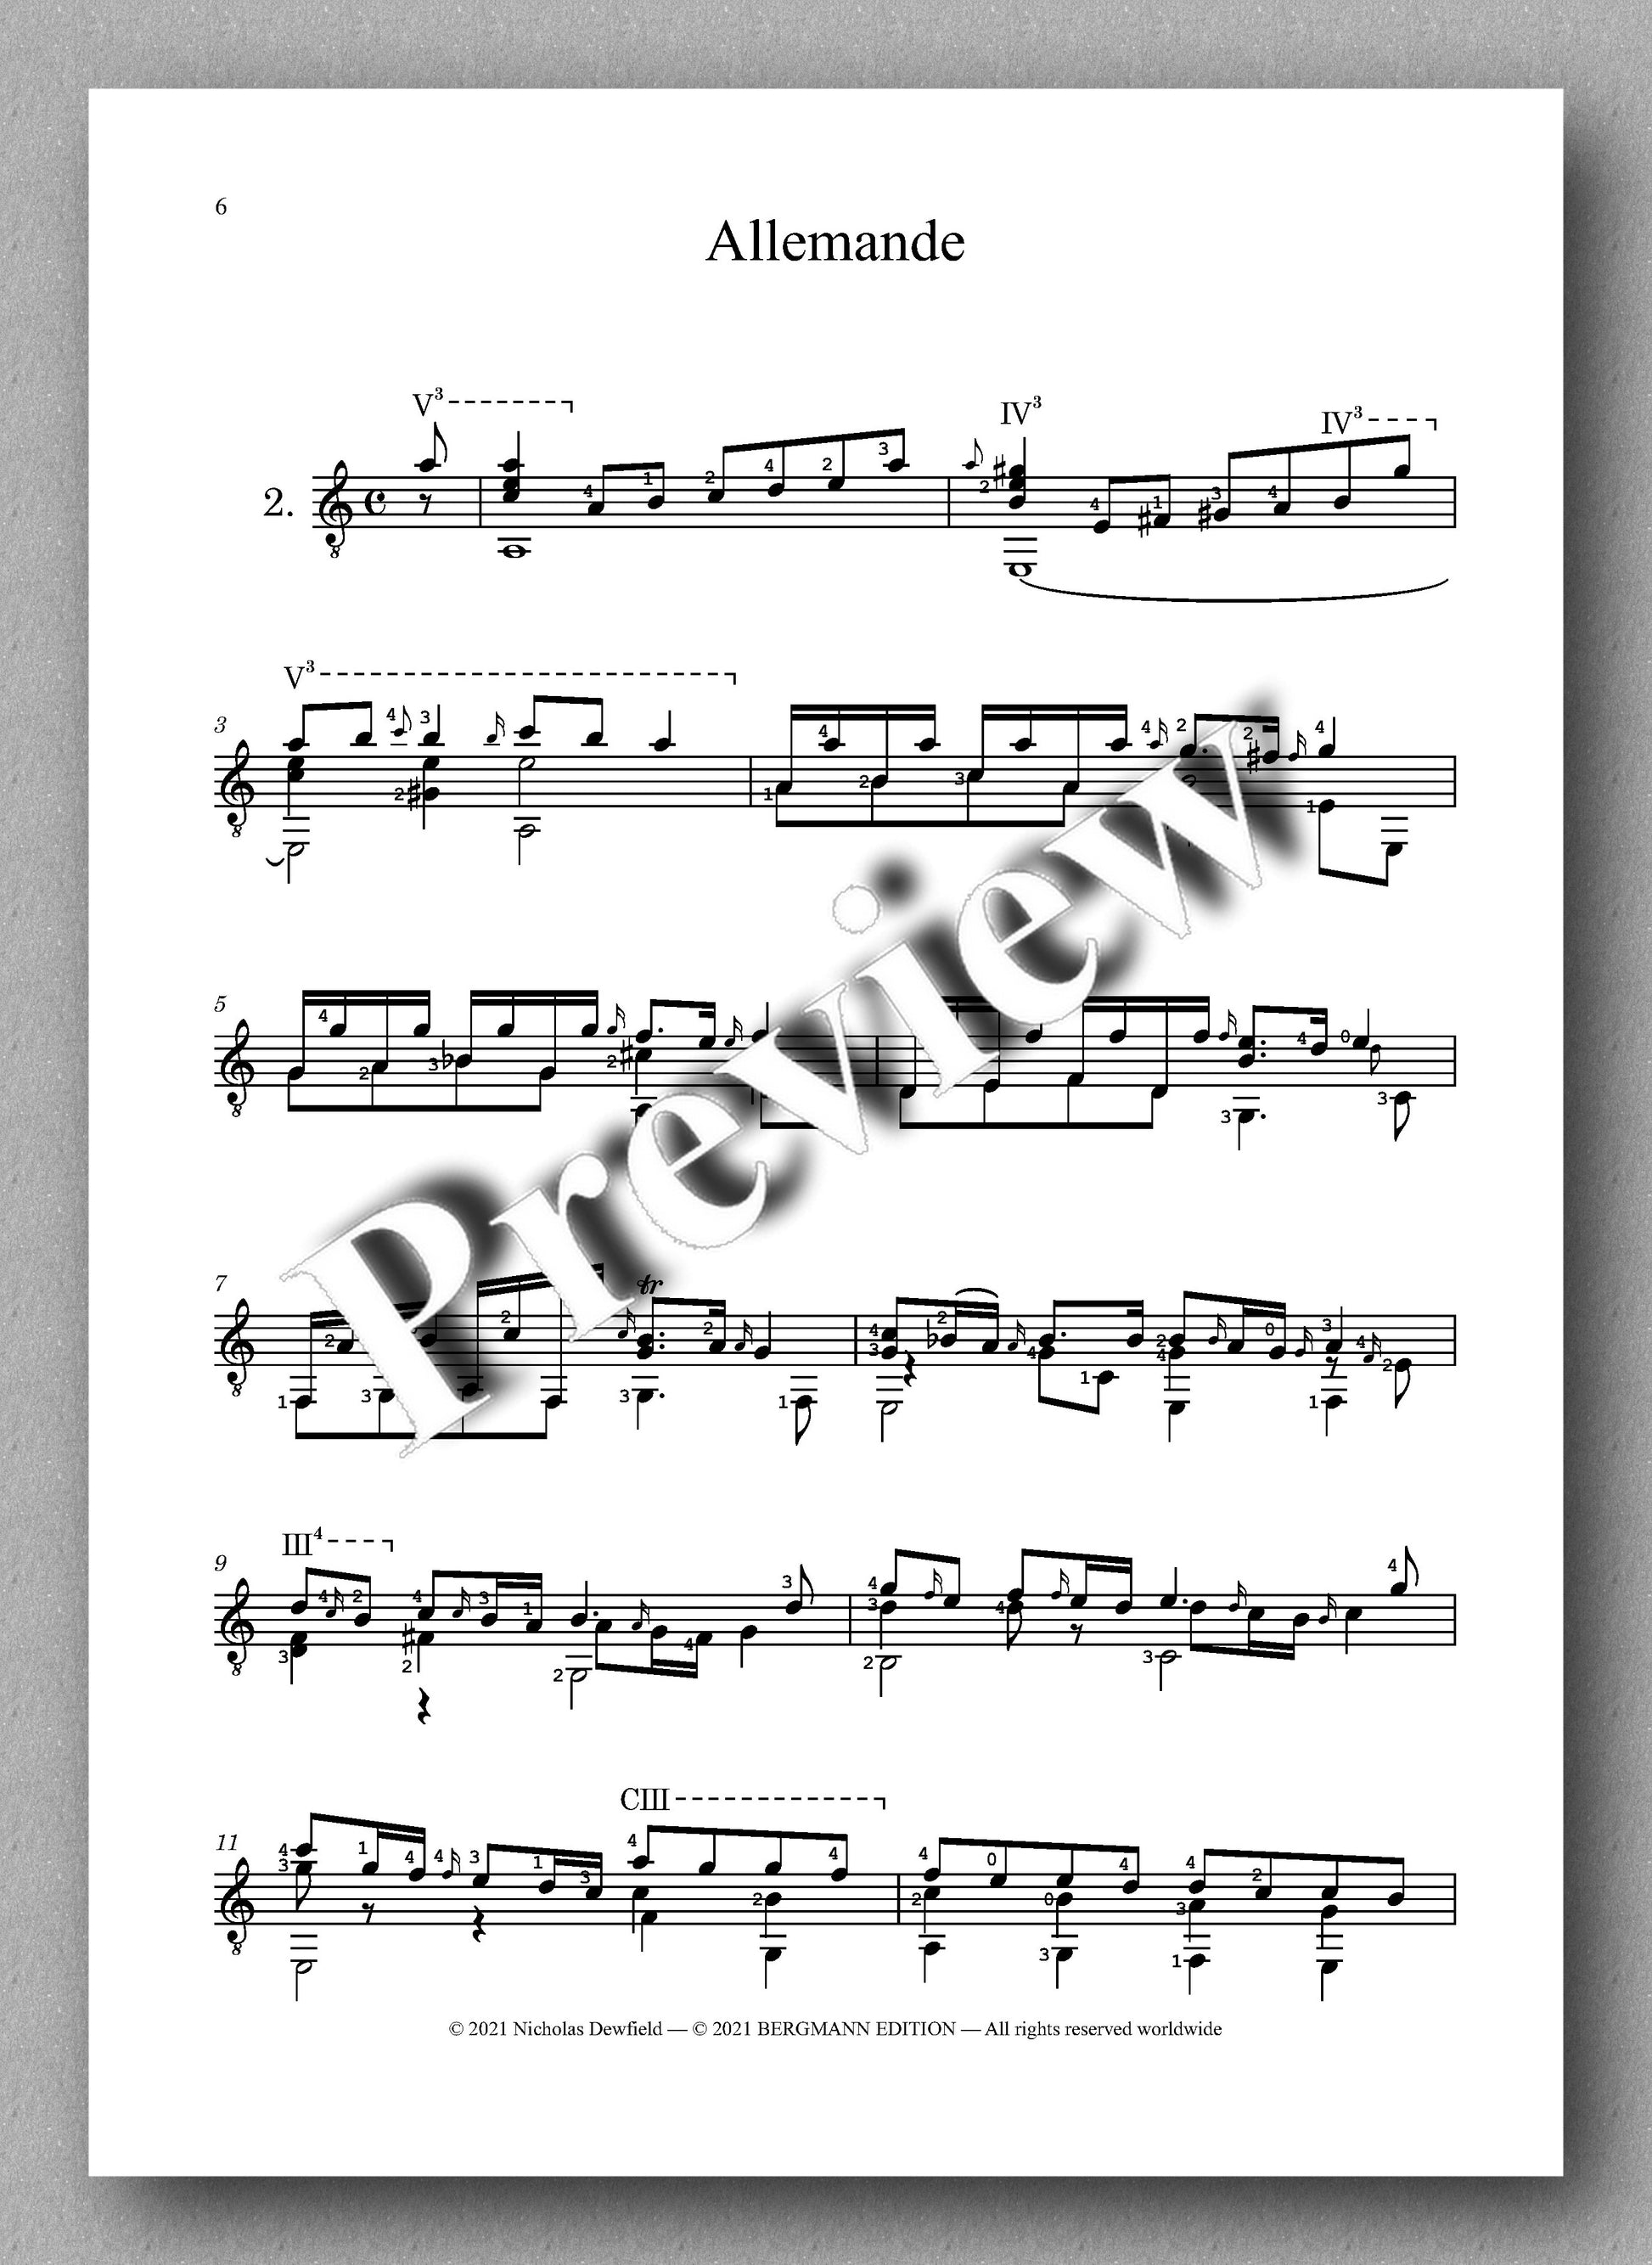 Weiss-Dewfield, Sonata No. 3 - preview of music score 2